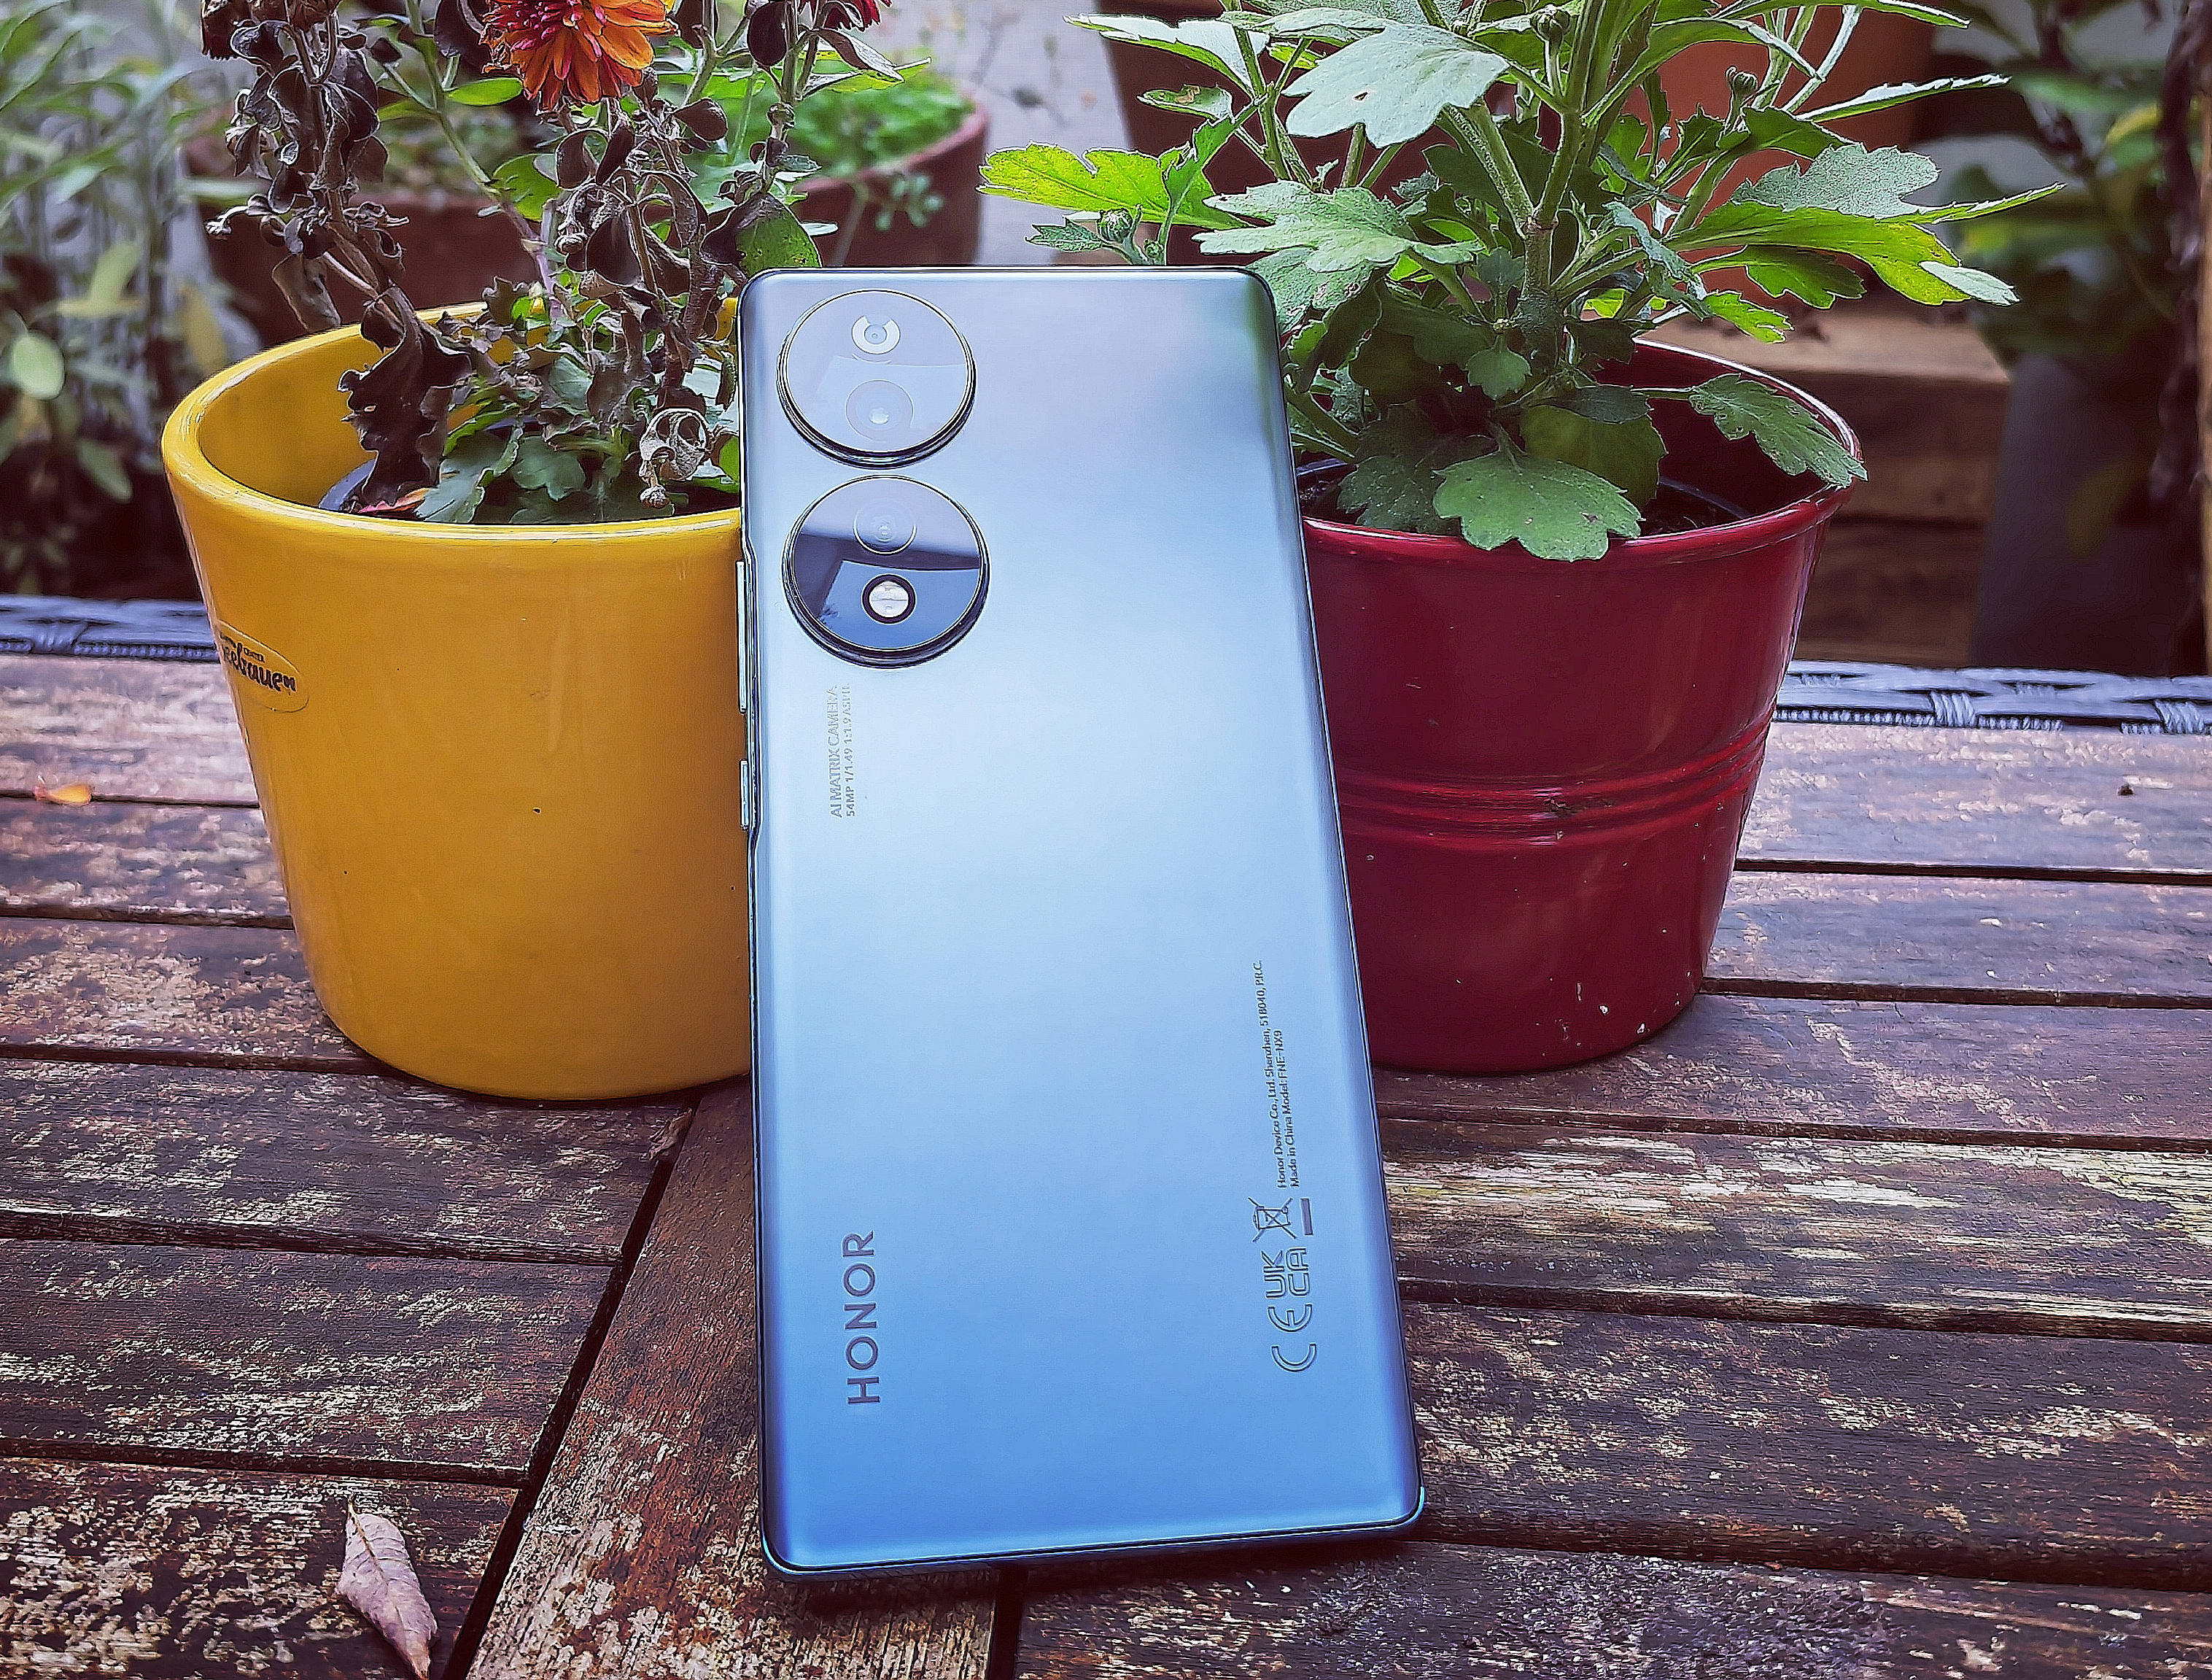 Honor 70 review - The slim phone saves on the SoC -   Reviews